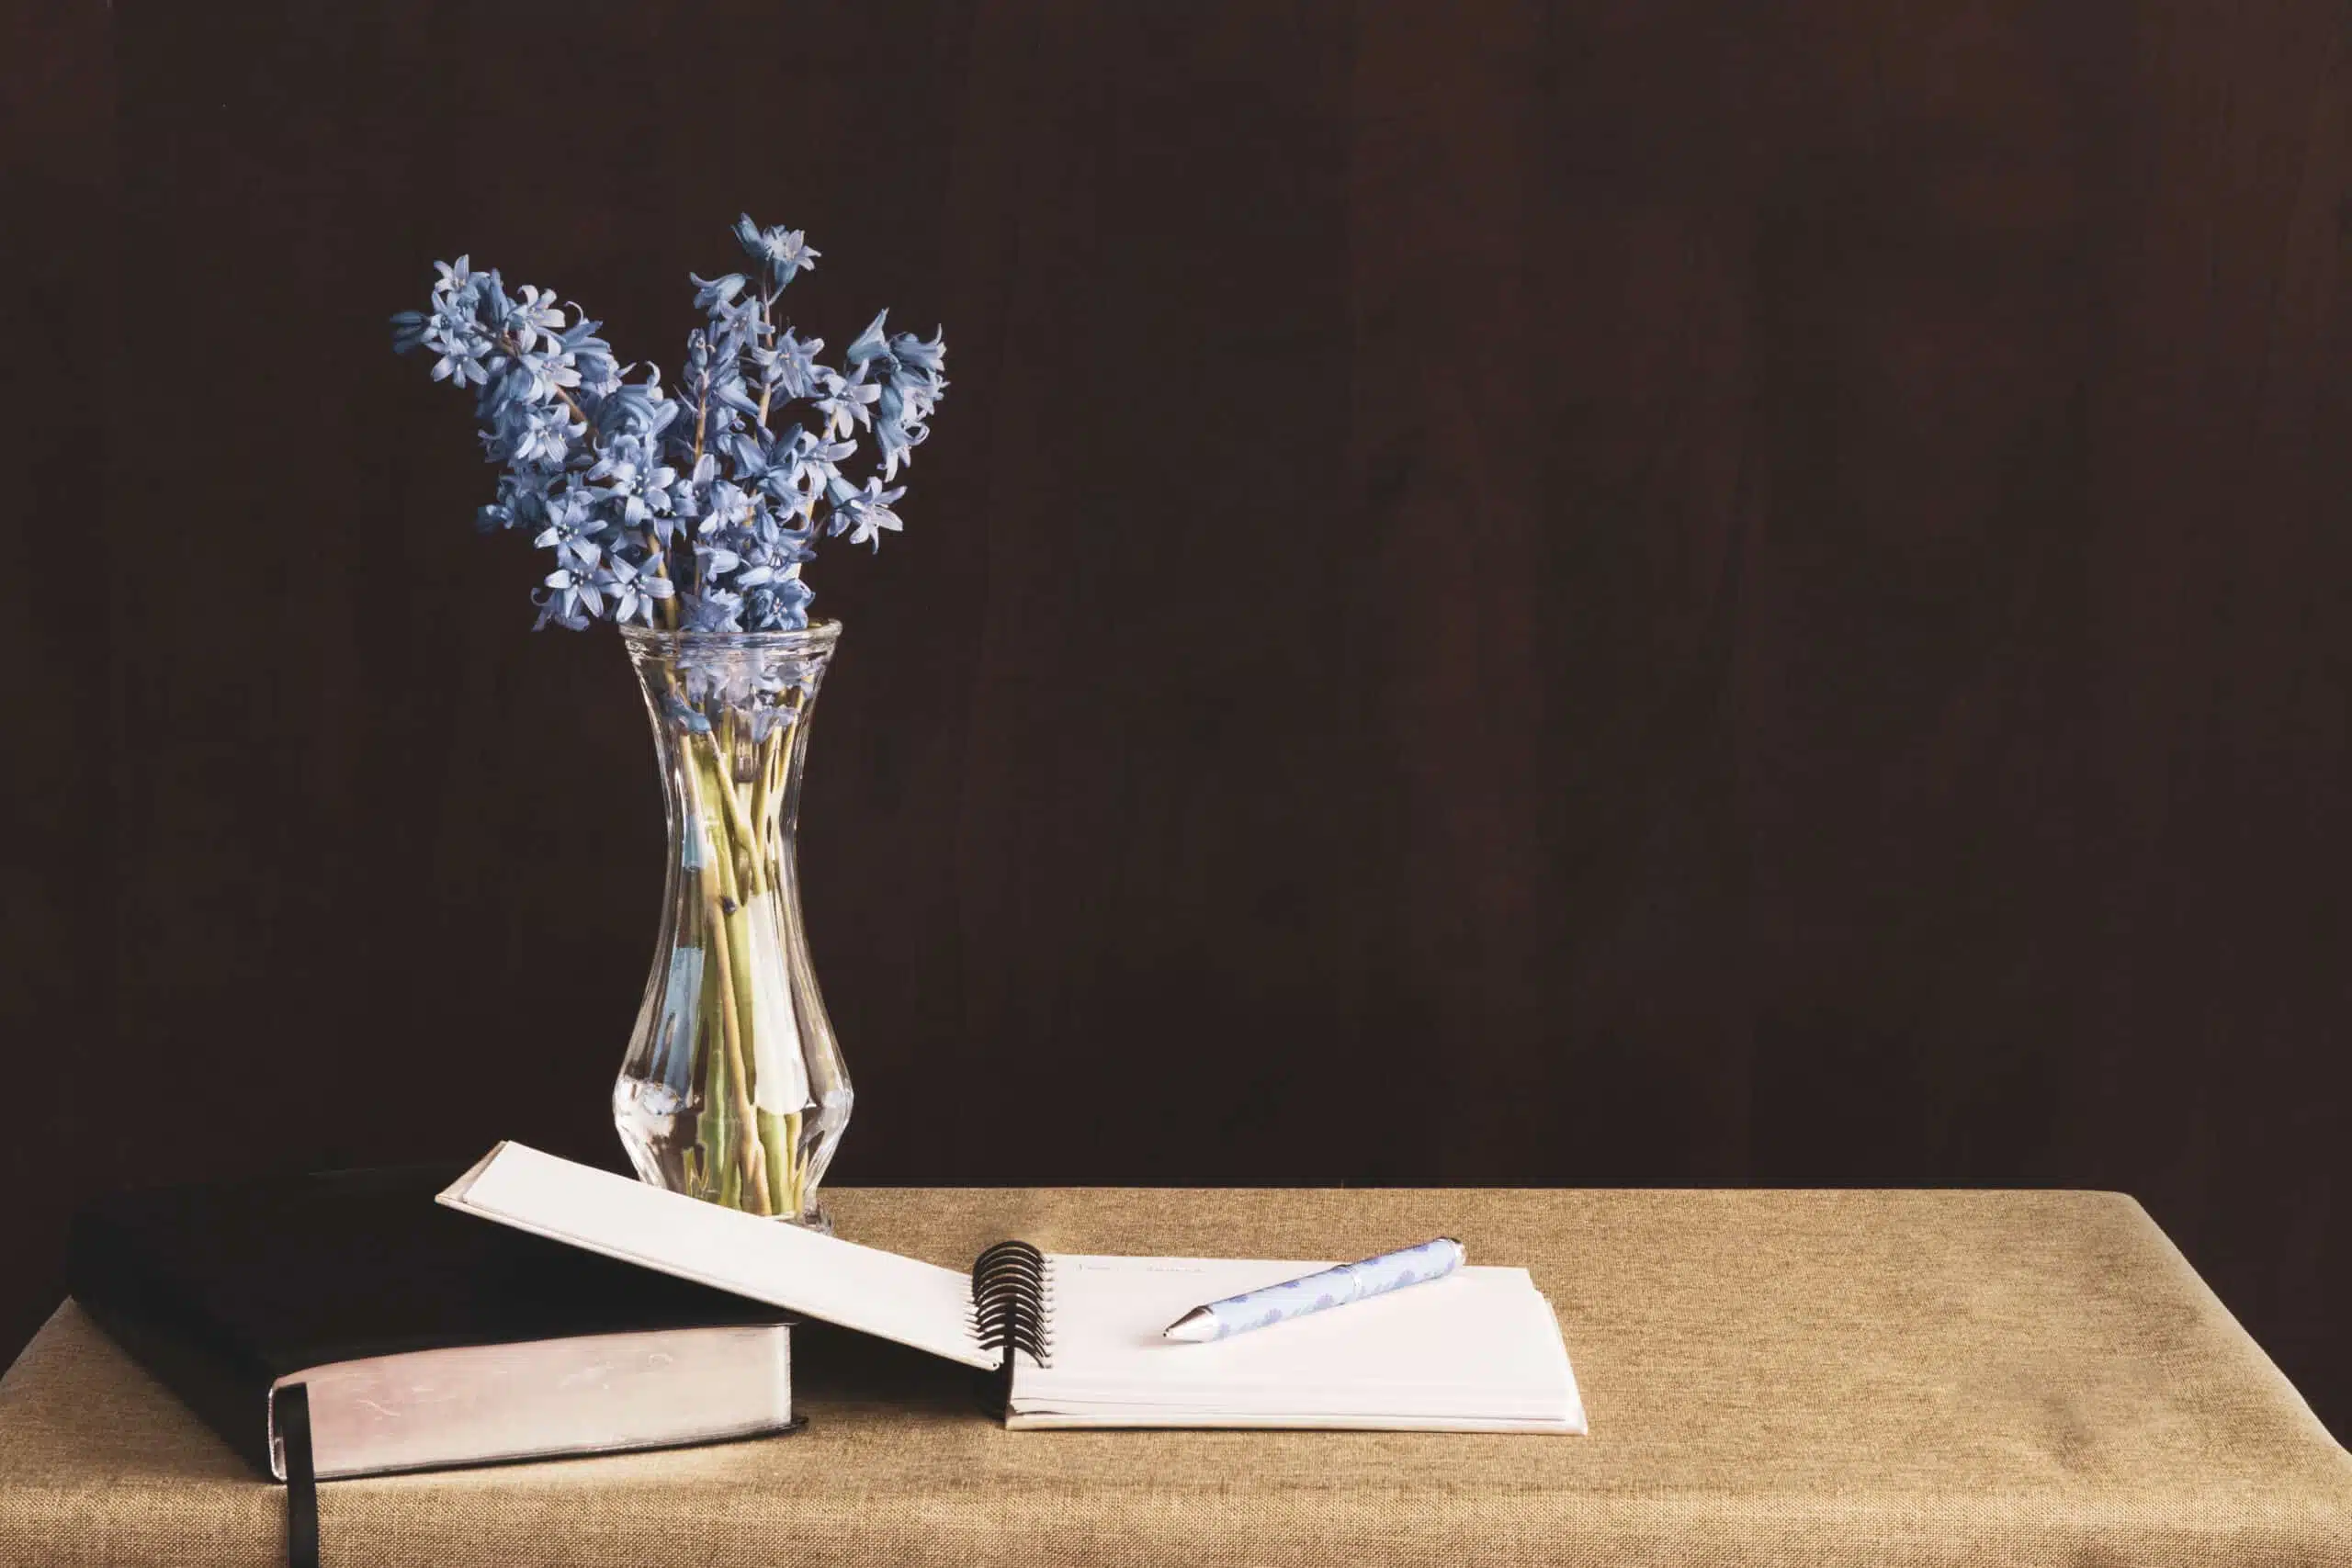 journal placed on a table with purple flowers in vase